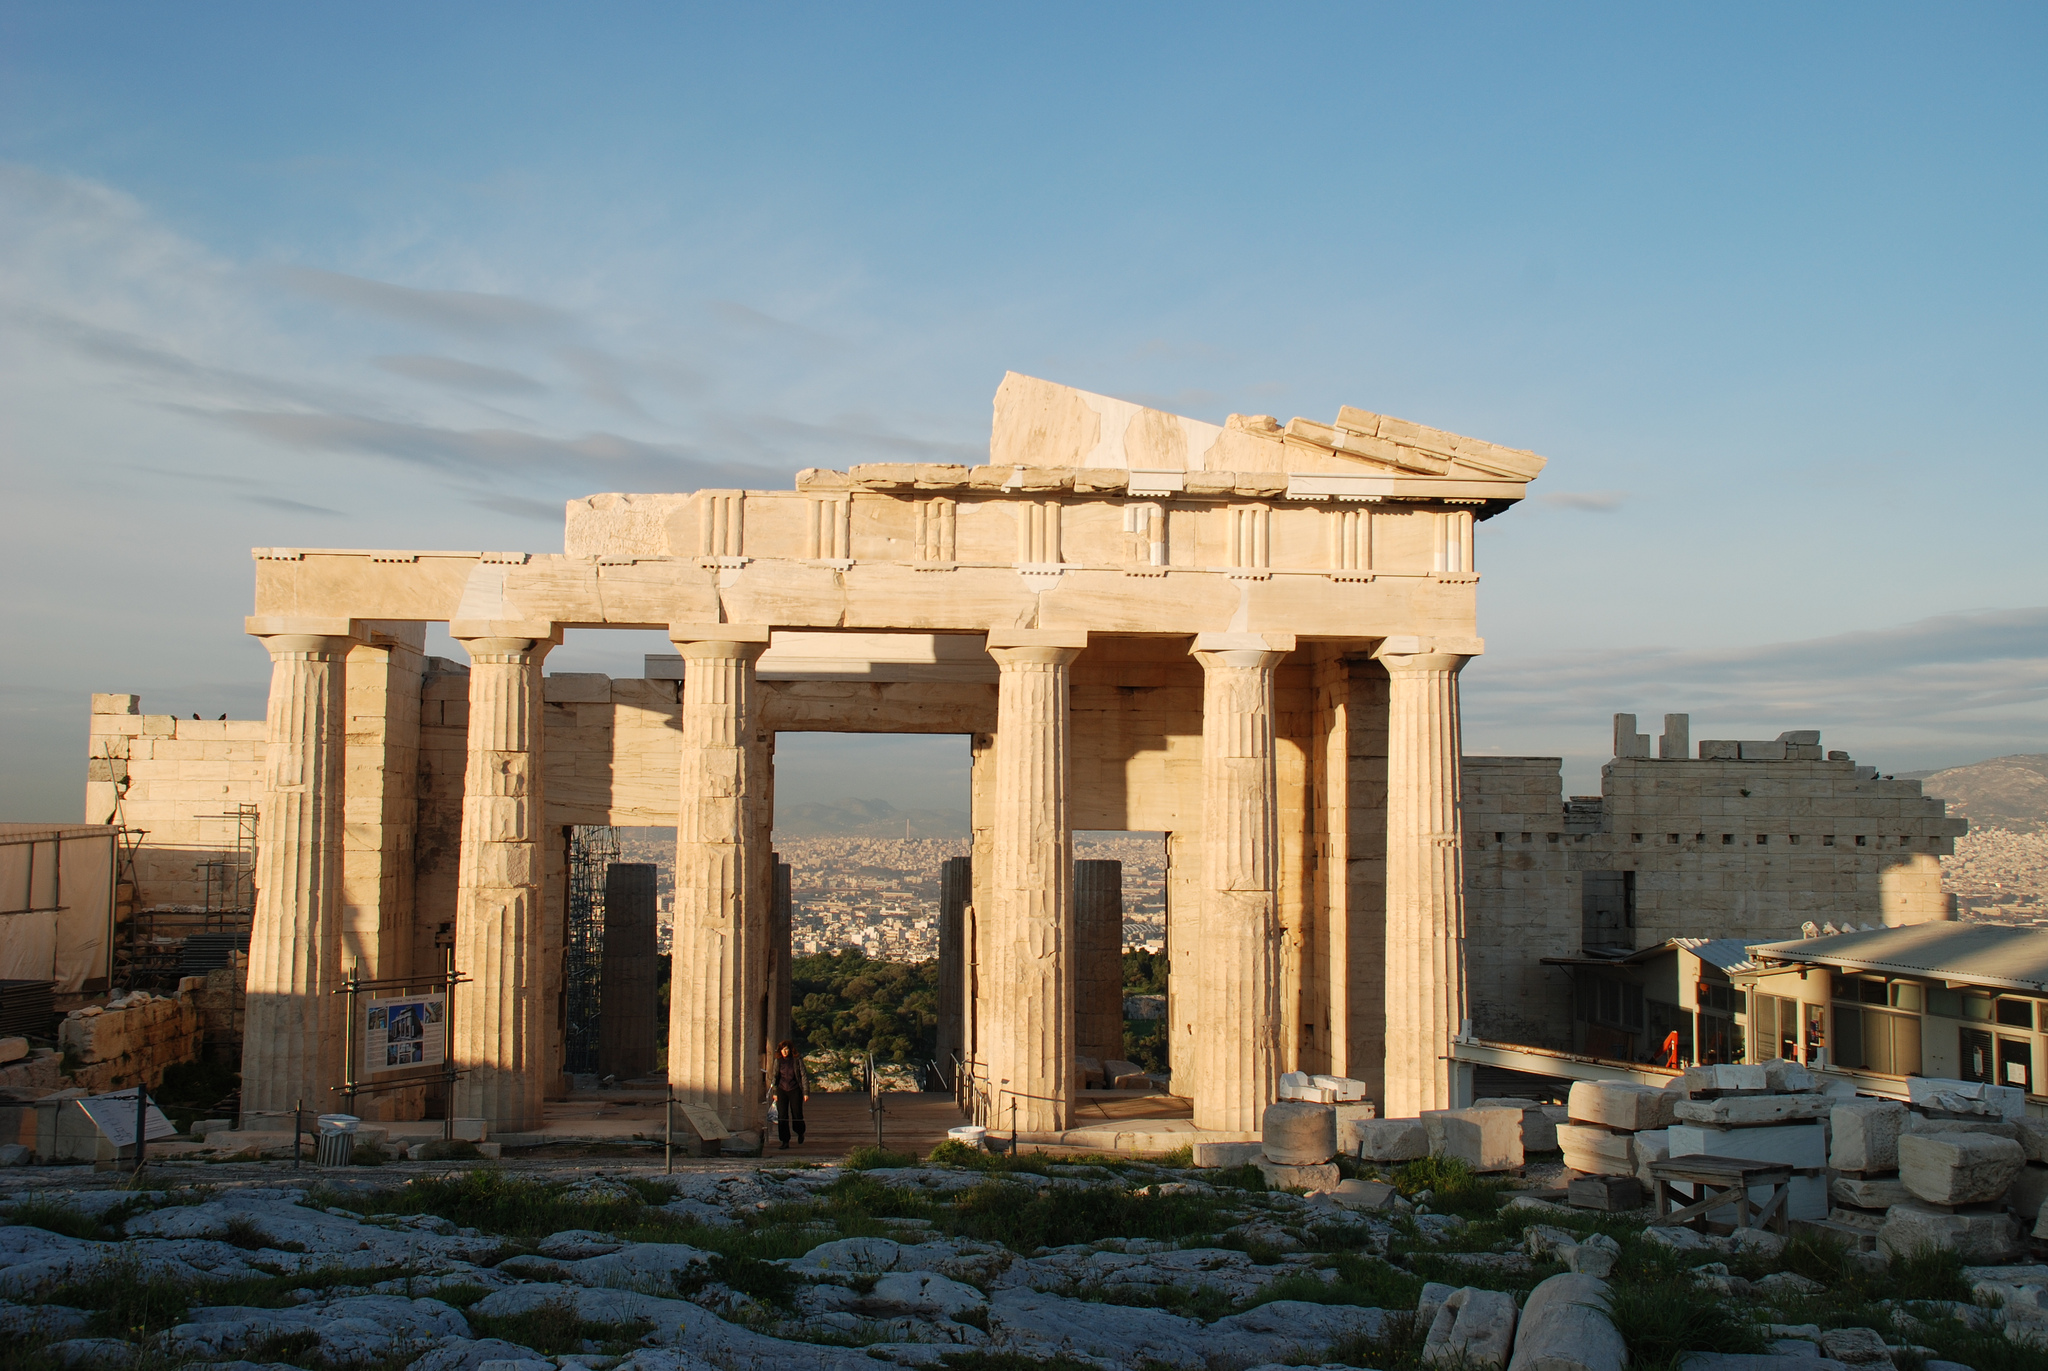 Photo: The Propylaea Central Building in Athens